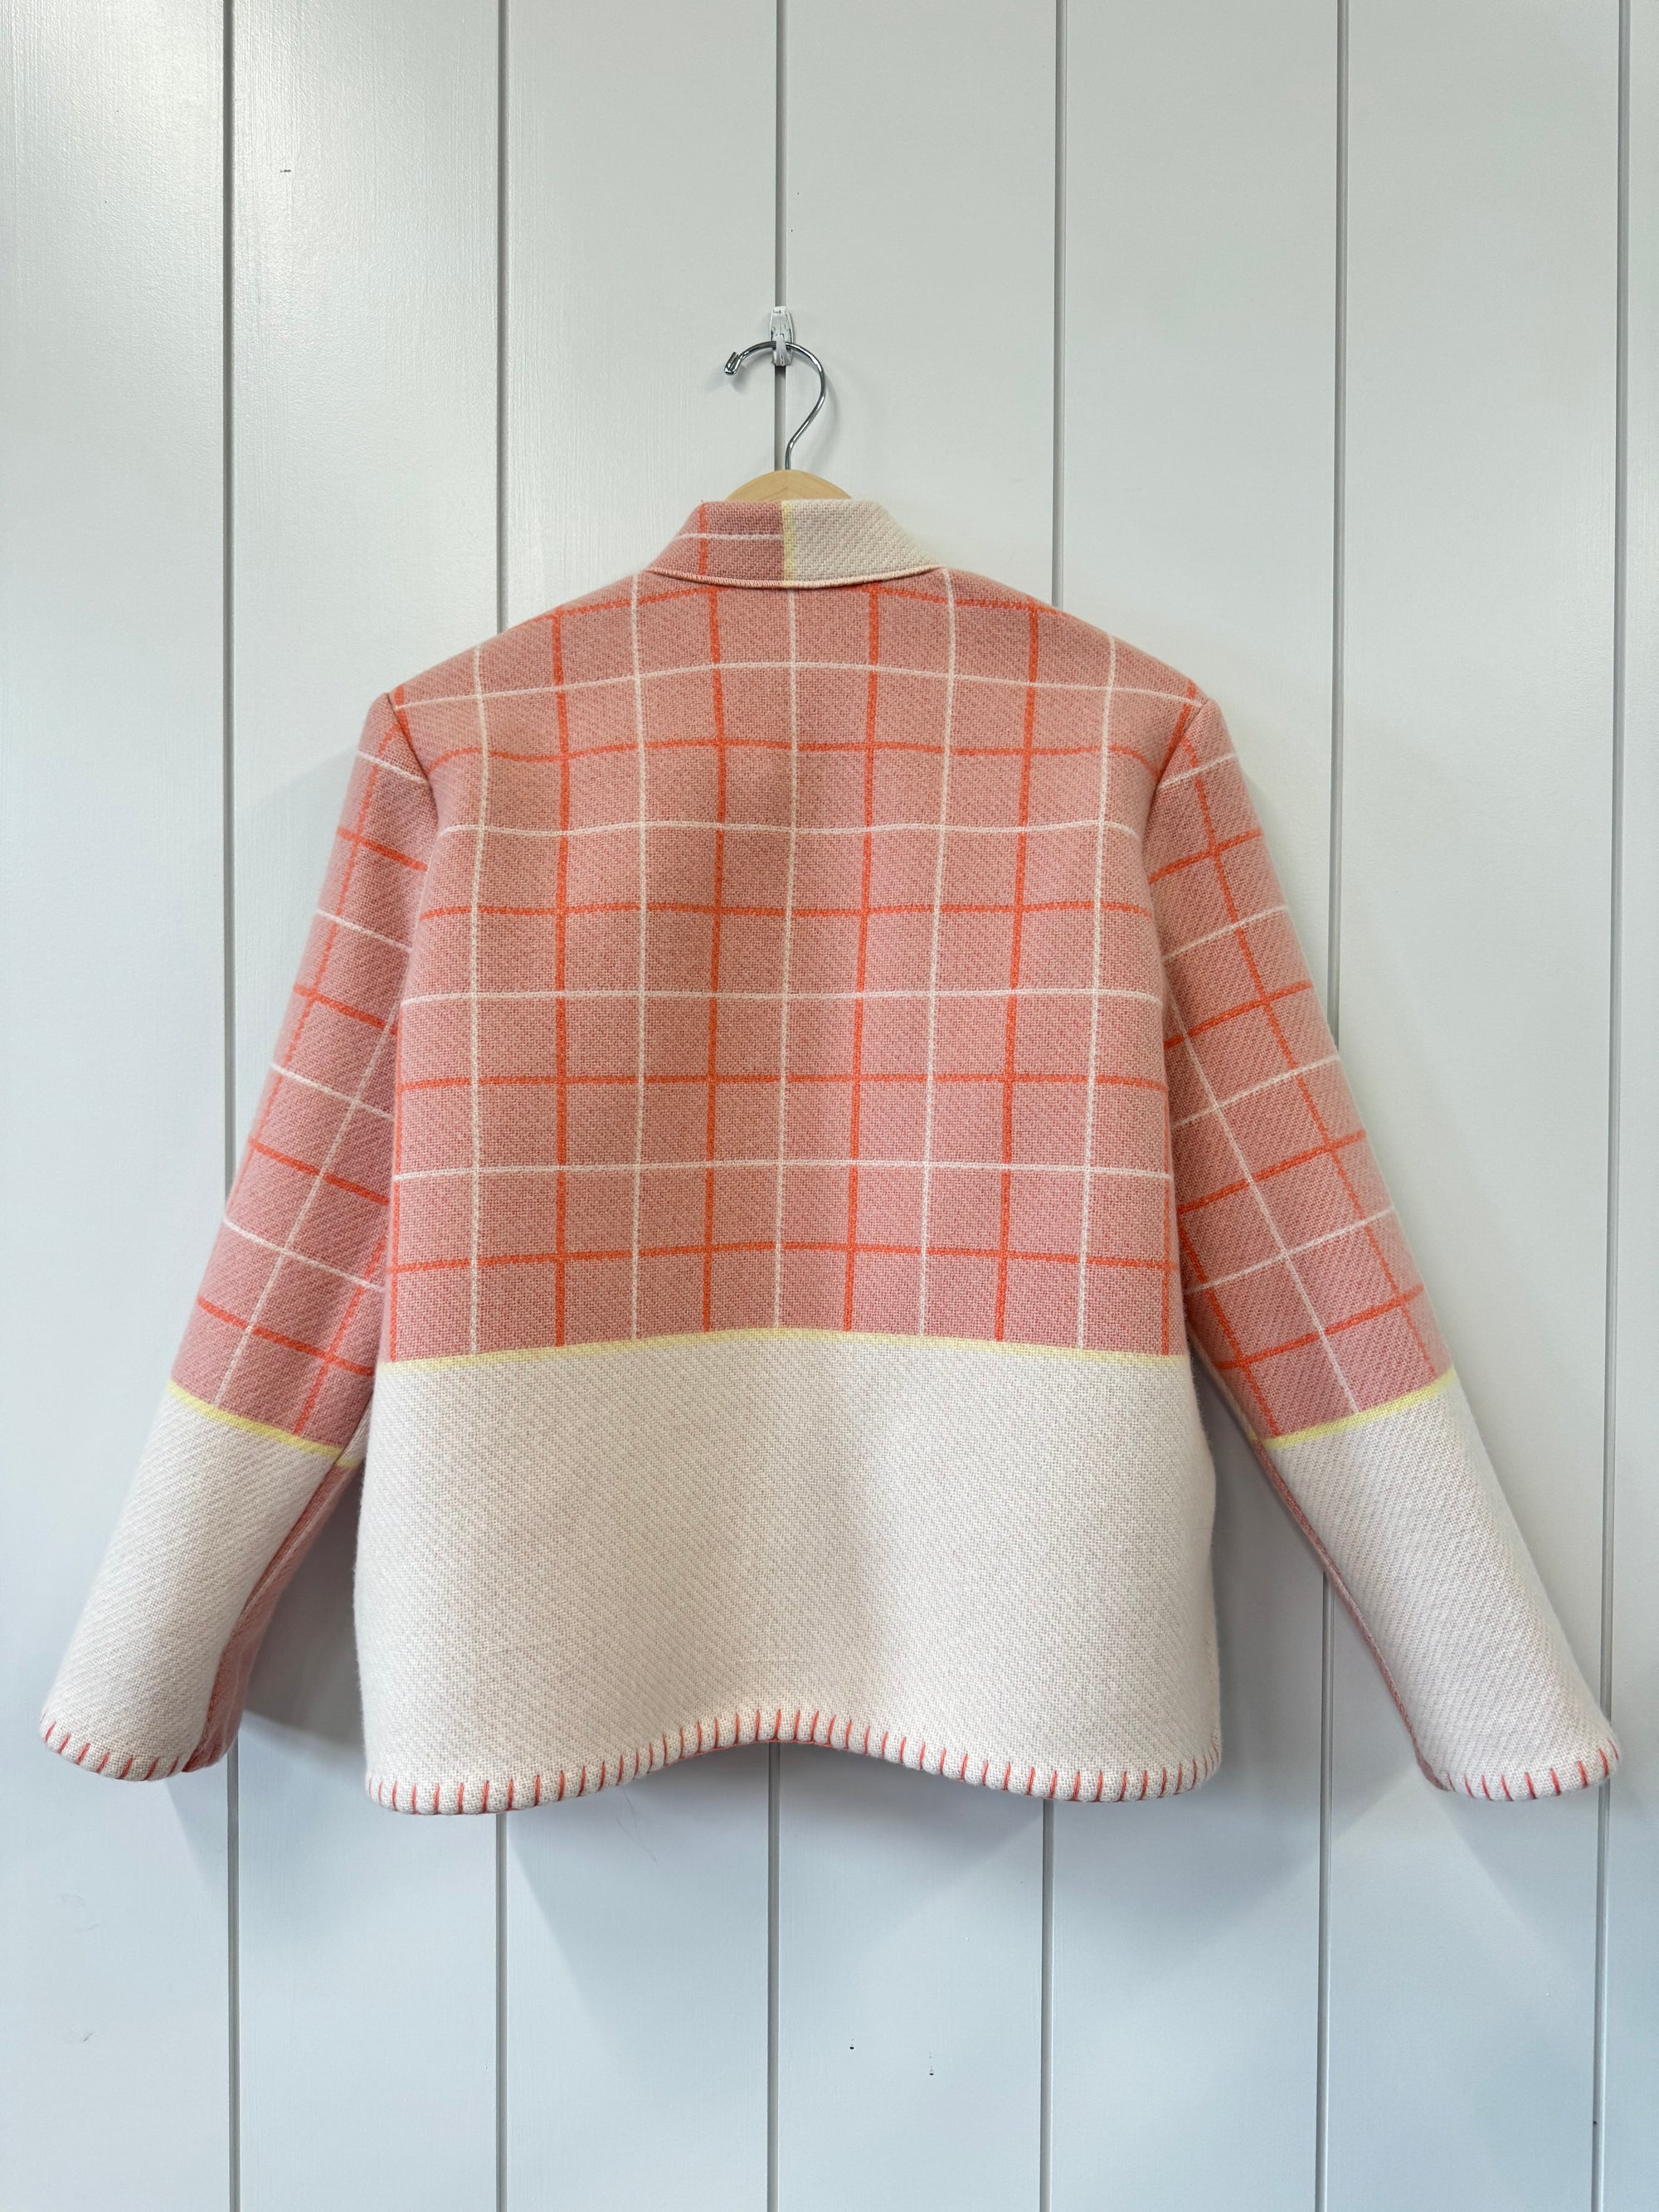 The Pink Checkers Jacket